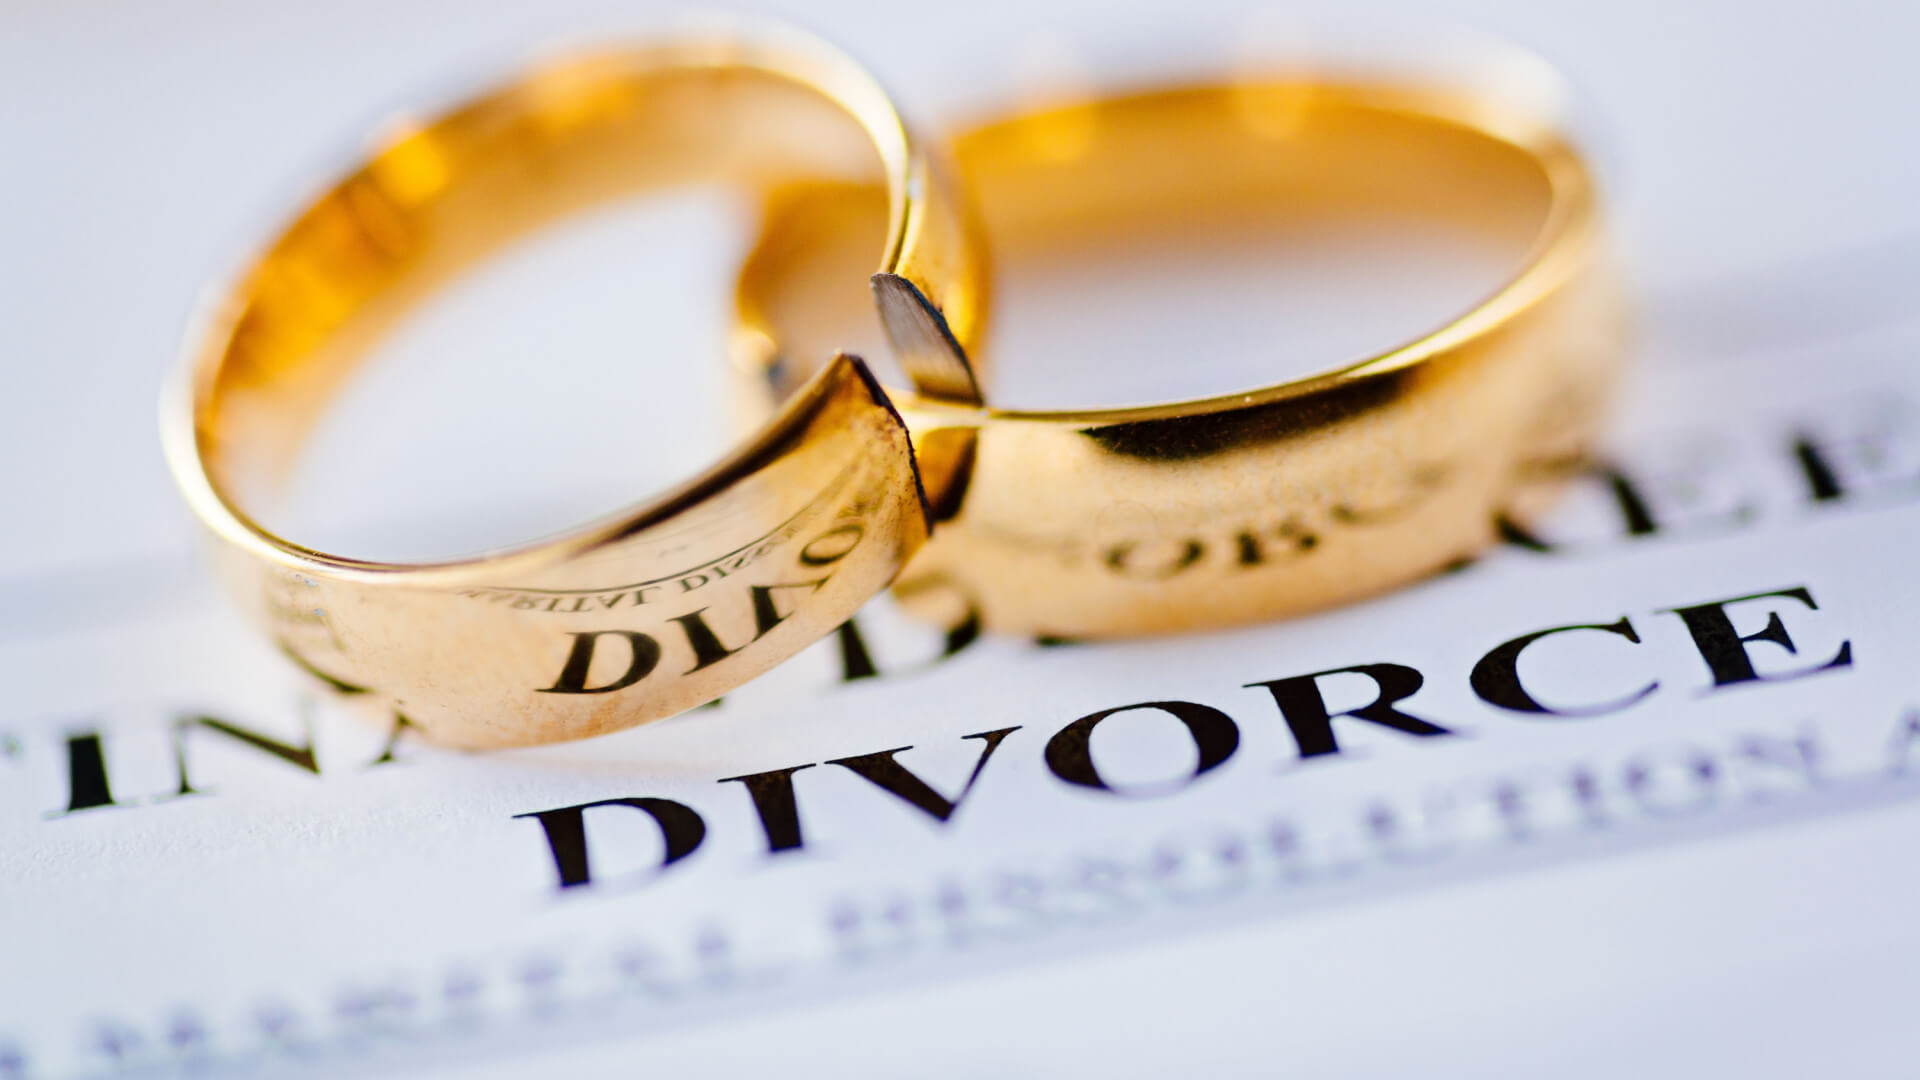 6 Requirements For Changing Your Name Post-Divorce